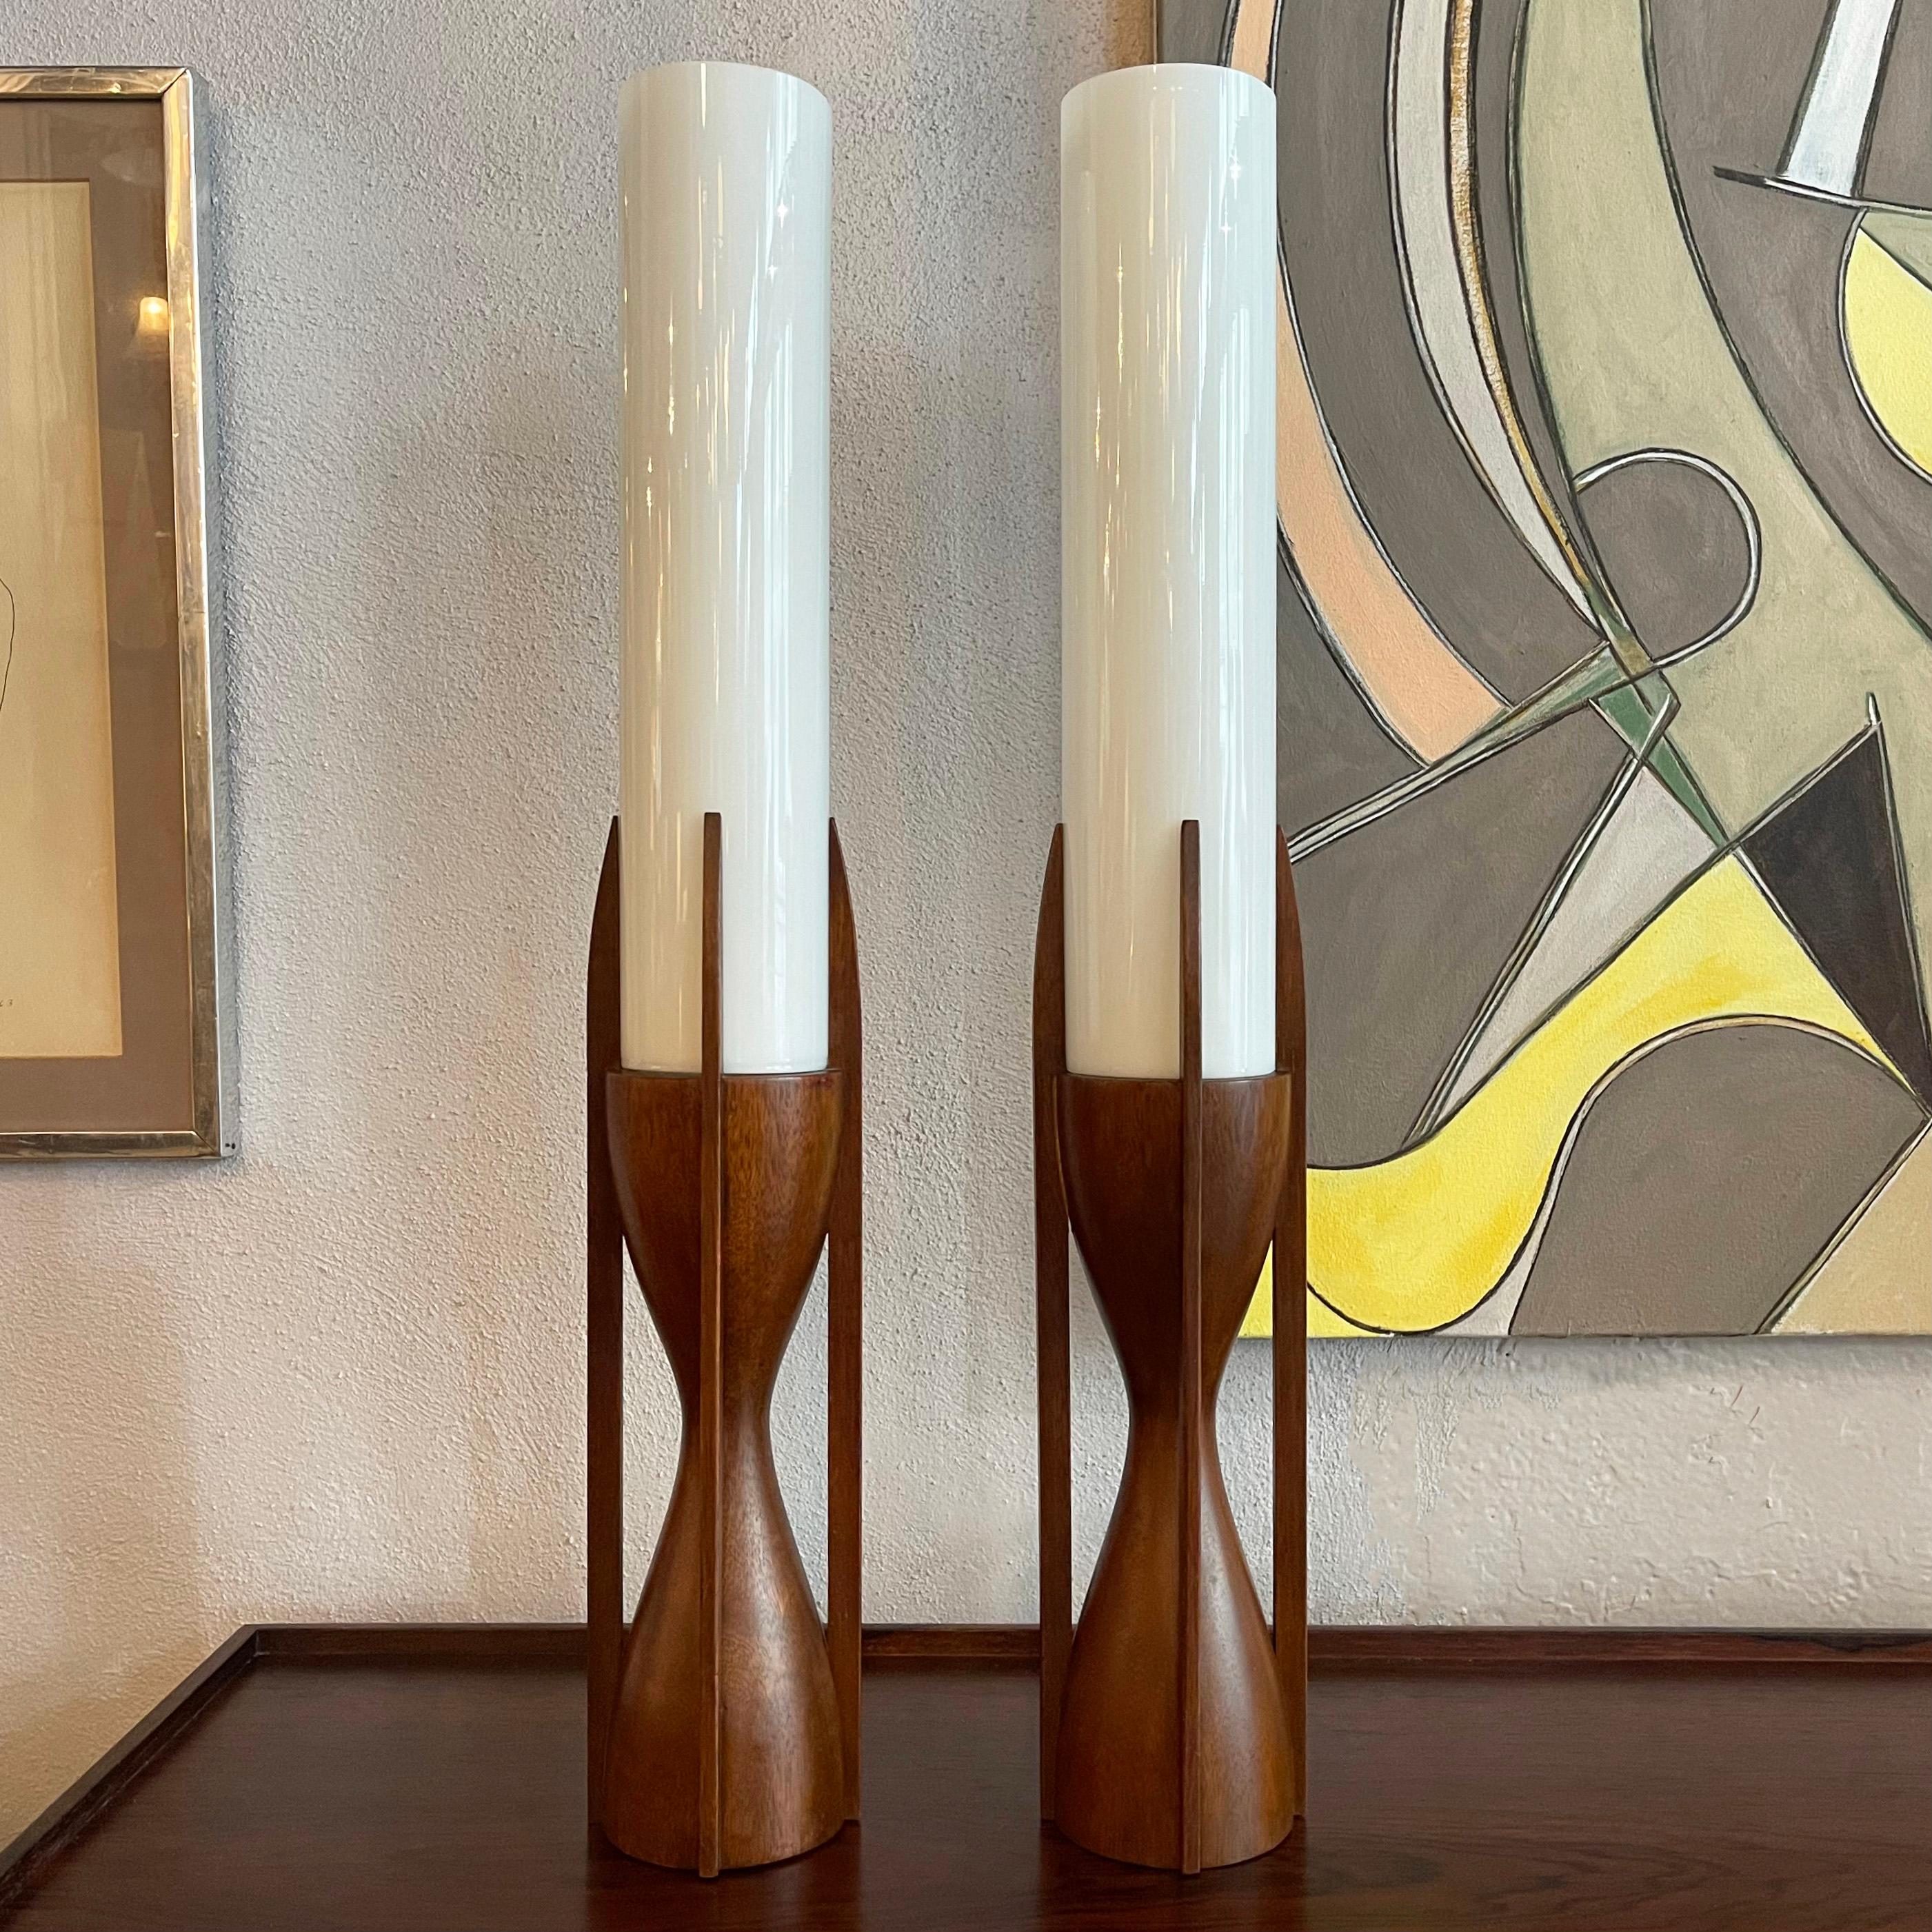 Impressive pair of mid-century modern, architectural table lamps by Byron Botker for Modeline Lamp Co. feature sculpted, hourlgass, walnut bases with 14 inch high milk glass cylinder shades fit into them. The lamps accept regular medium socket